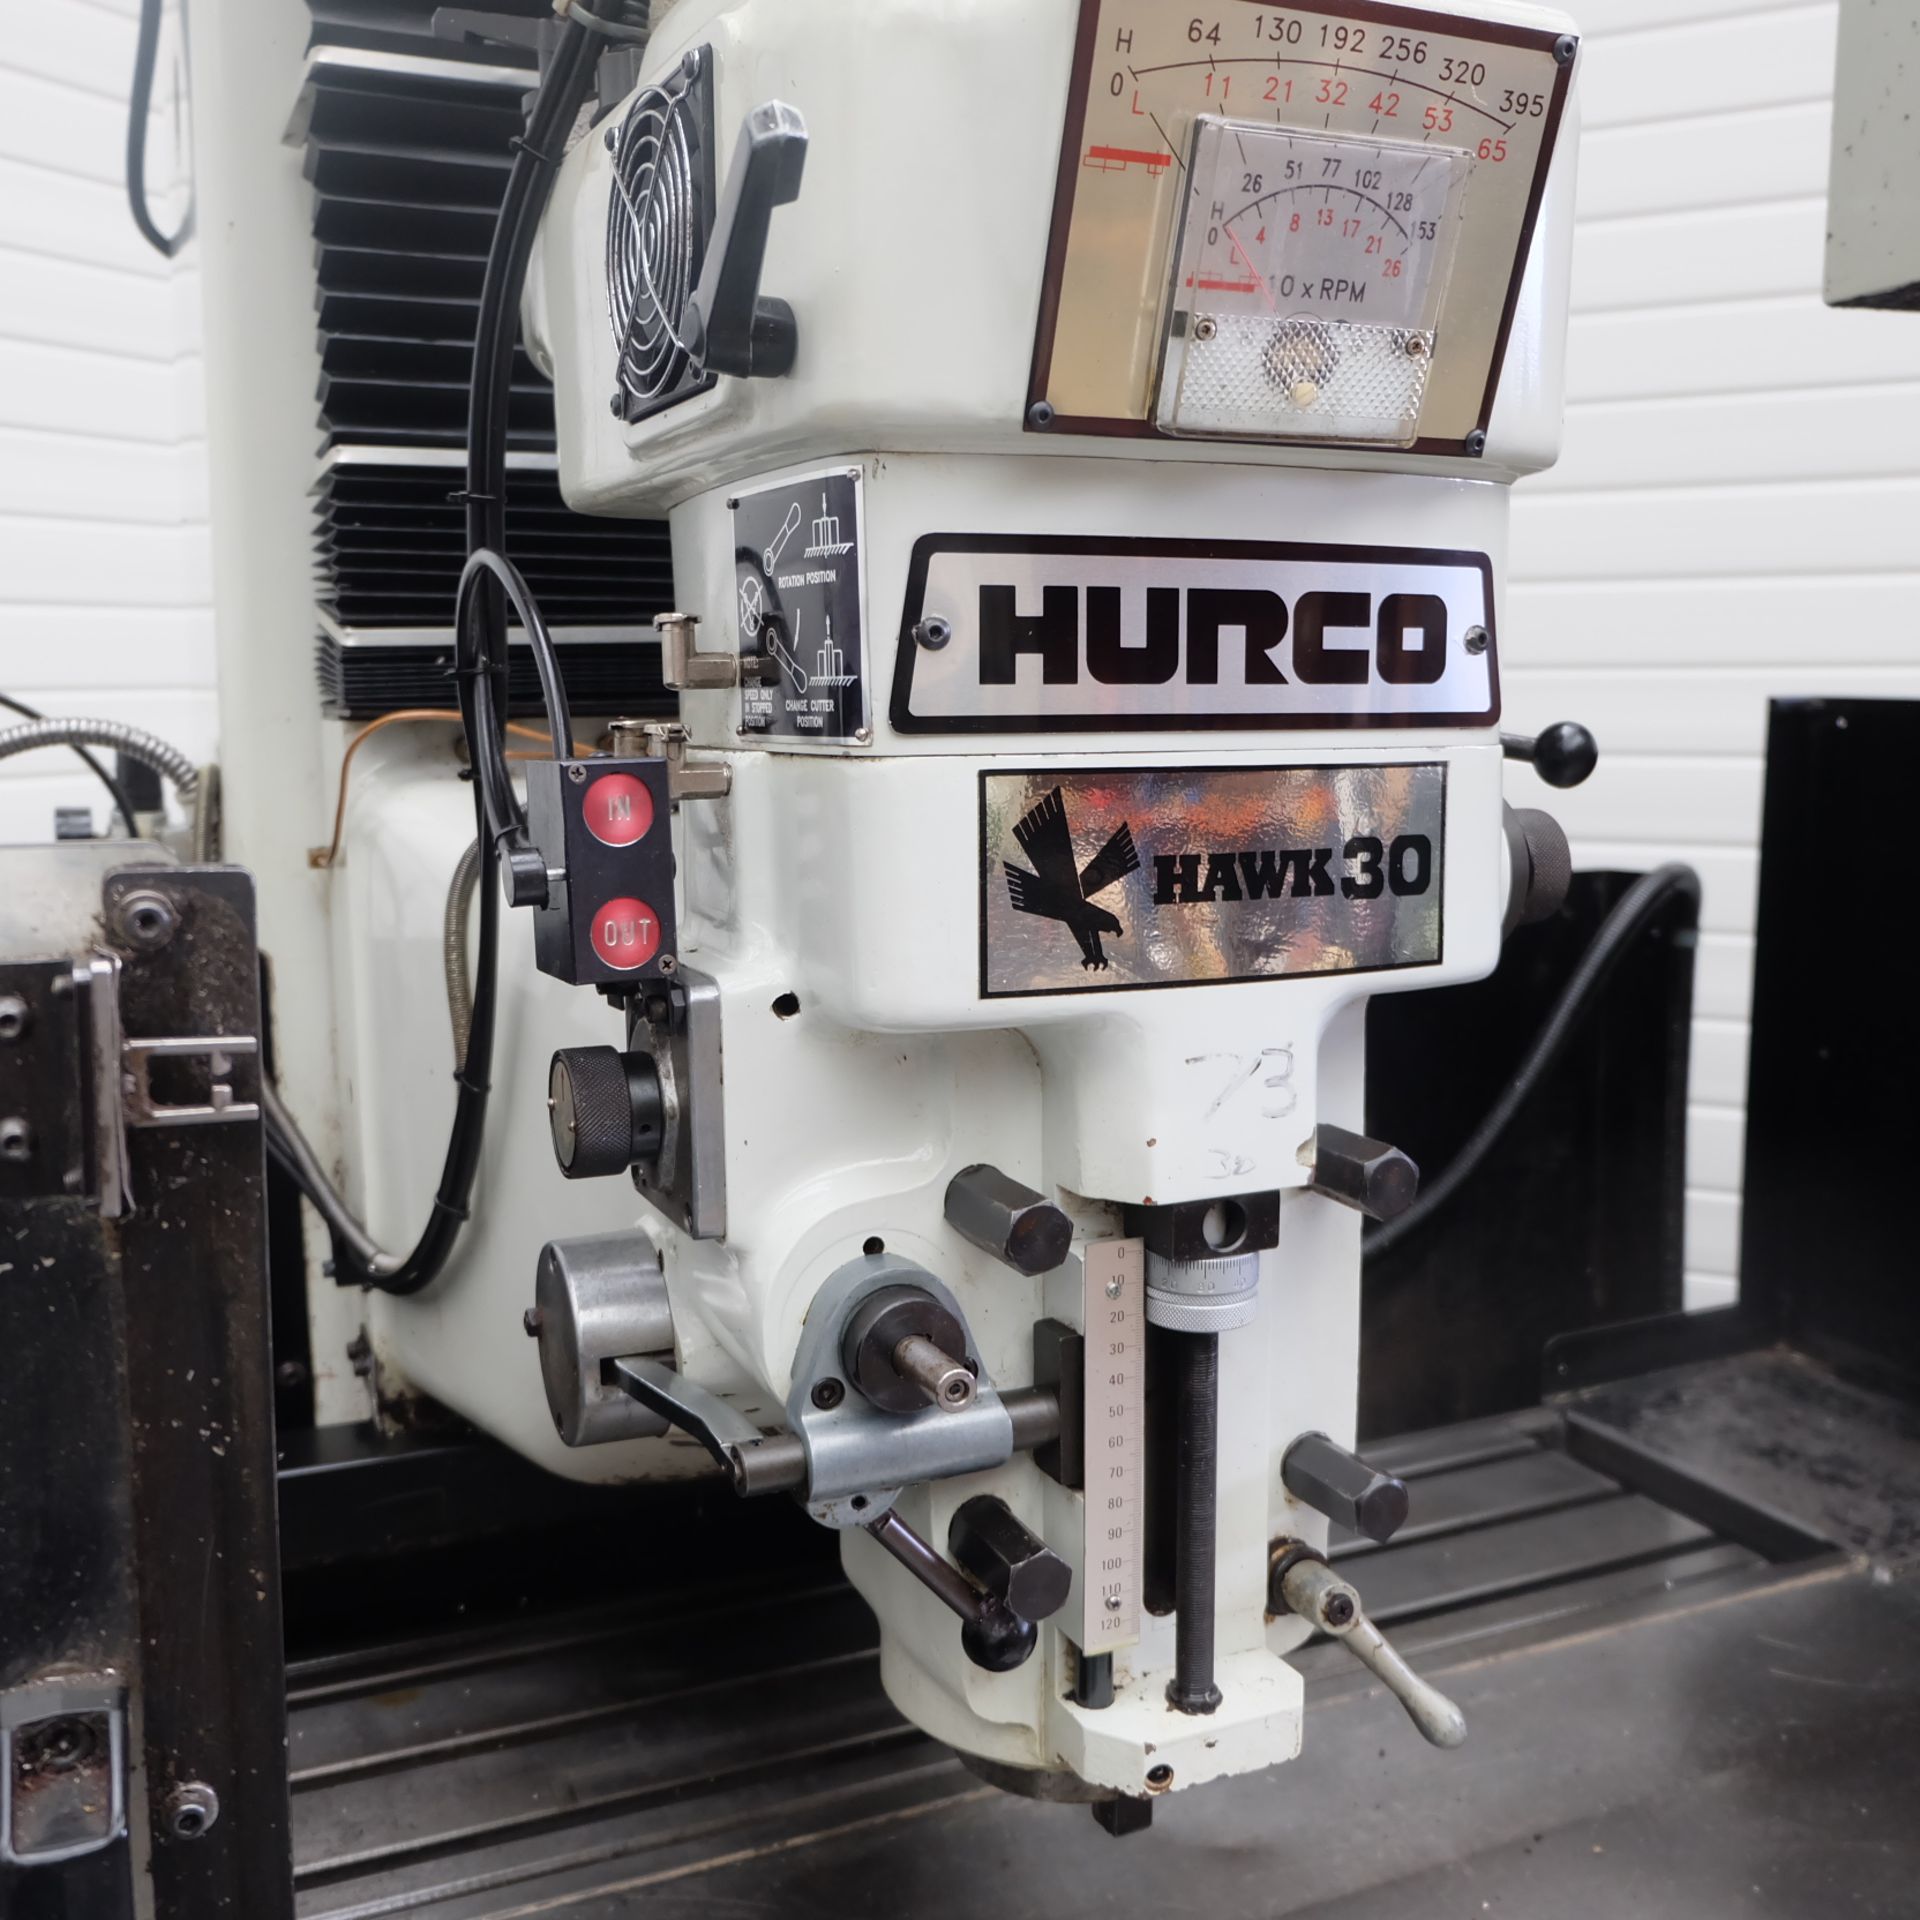 Hurco Hawk 30 CNC 3 Axis Vertical CNC Mill With Ultimax SSM Control. Table Size: 52" x 11". X Axis T - Bild 4 aus 15